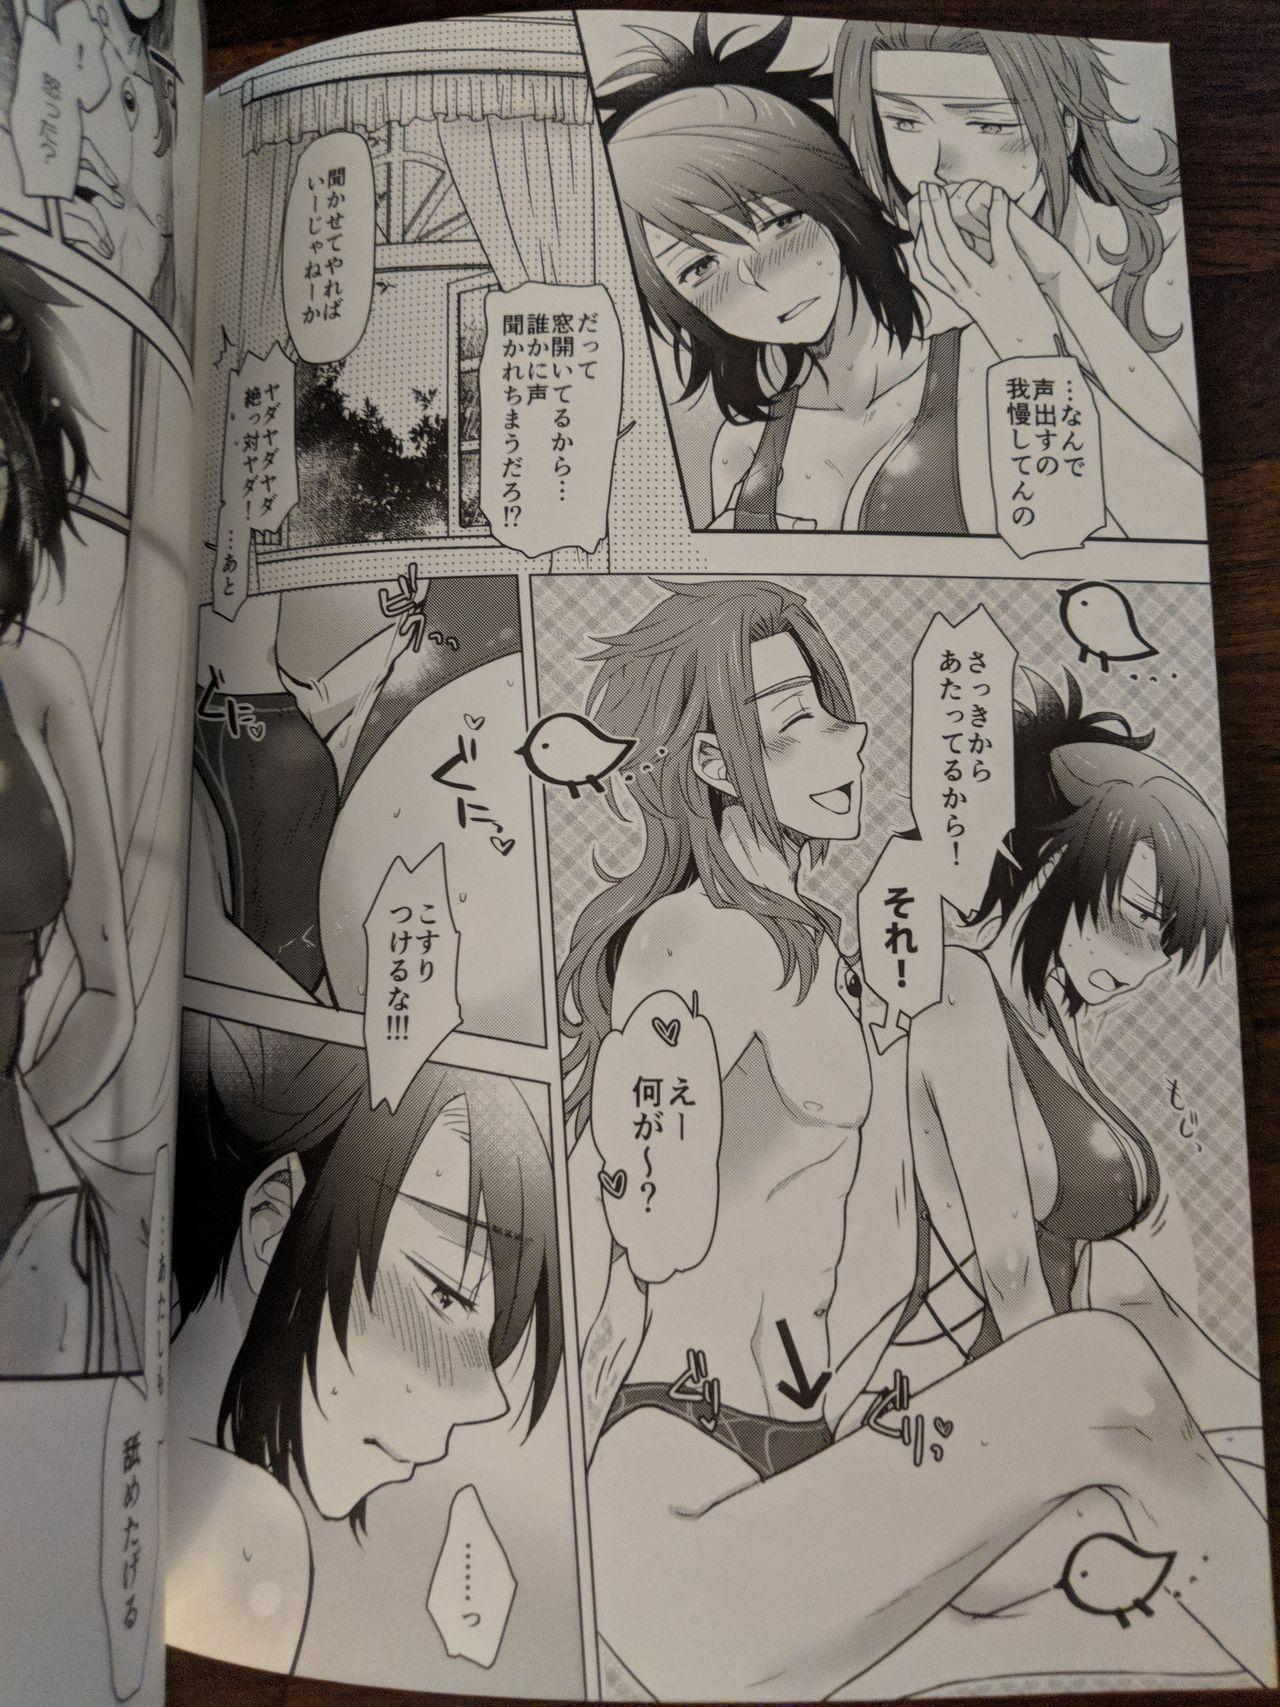 Squirt 彼女が水着にきがえたら - Tales of symphonia Skype - Page 11